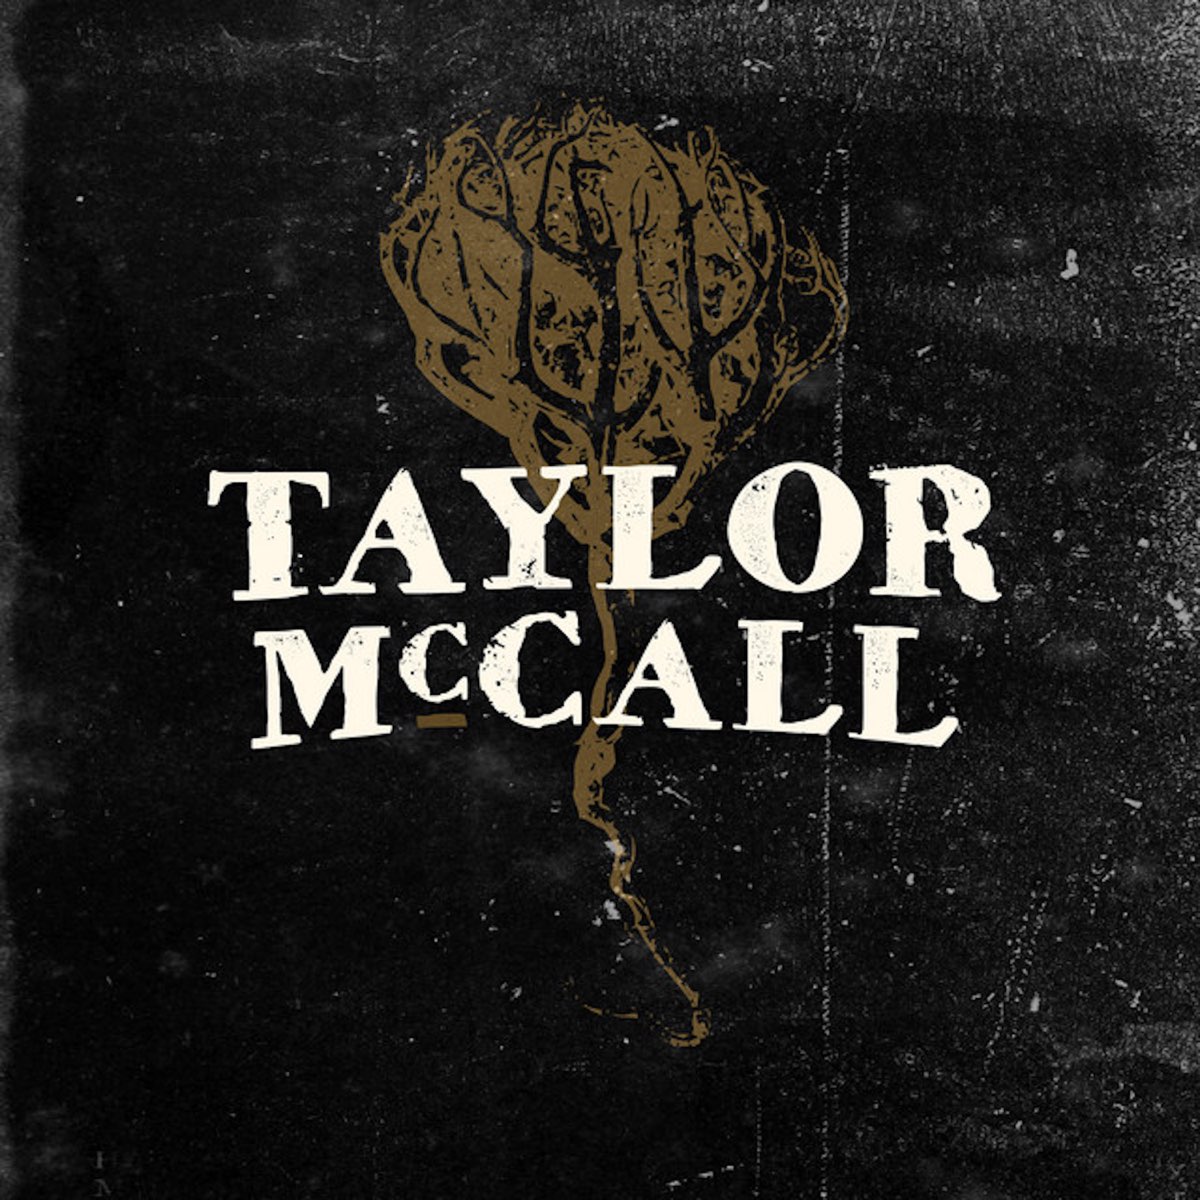 ‎Taylor McCall - EP - Album by Taylor McCall - Apple Music